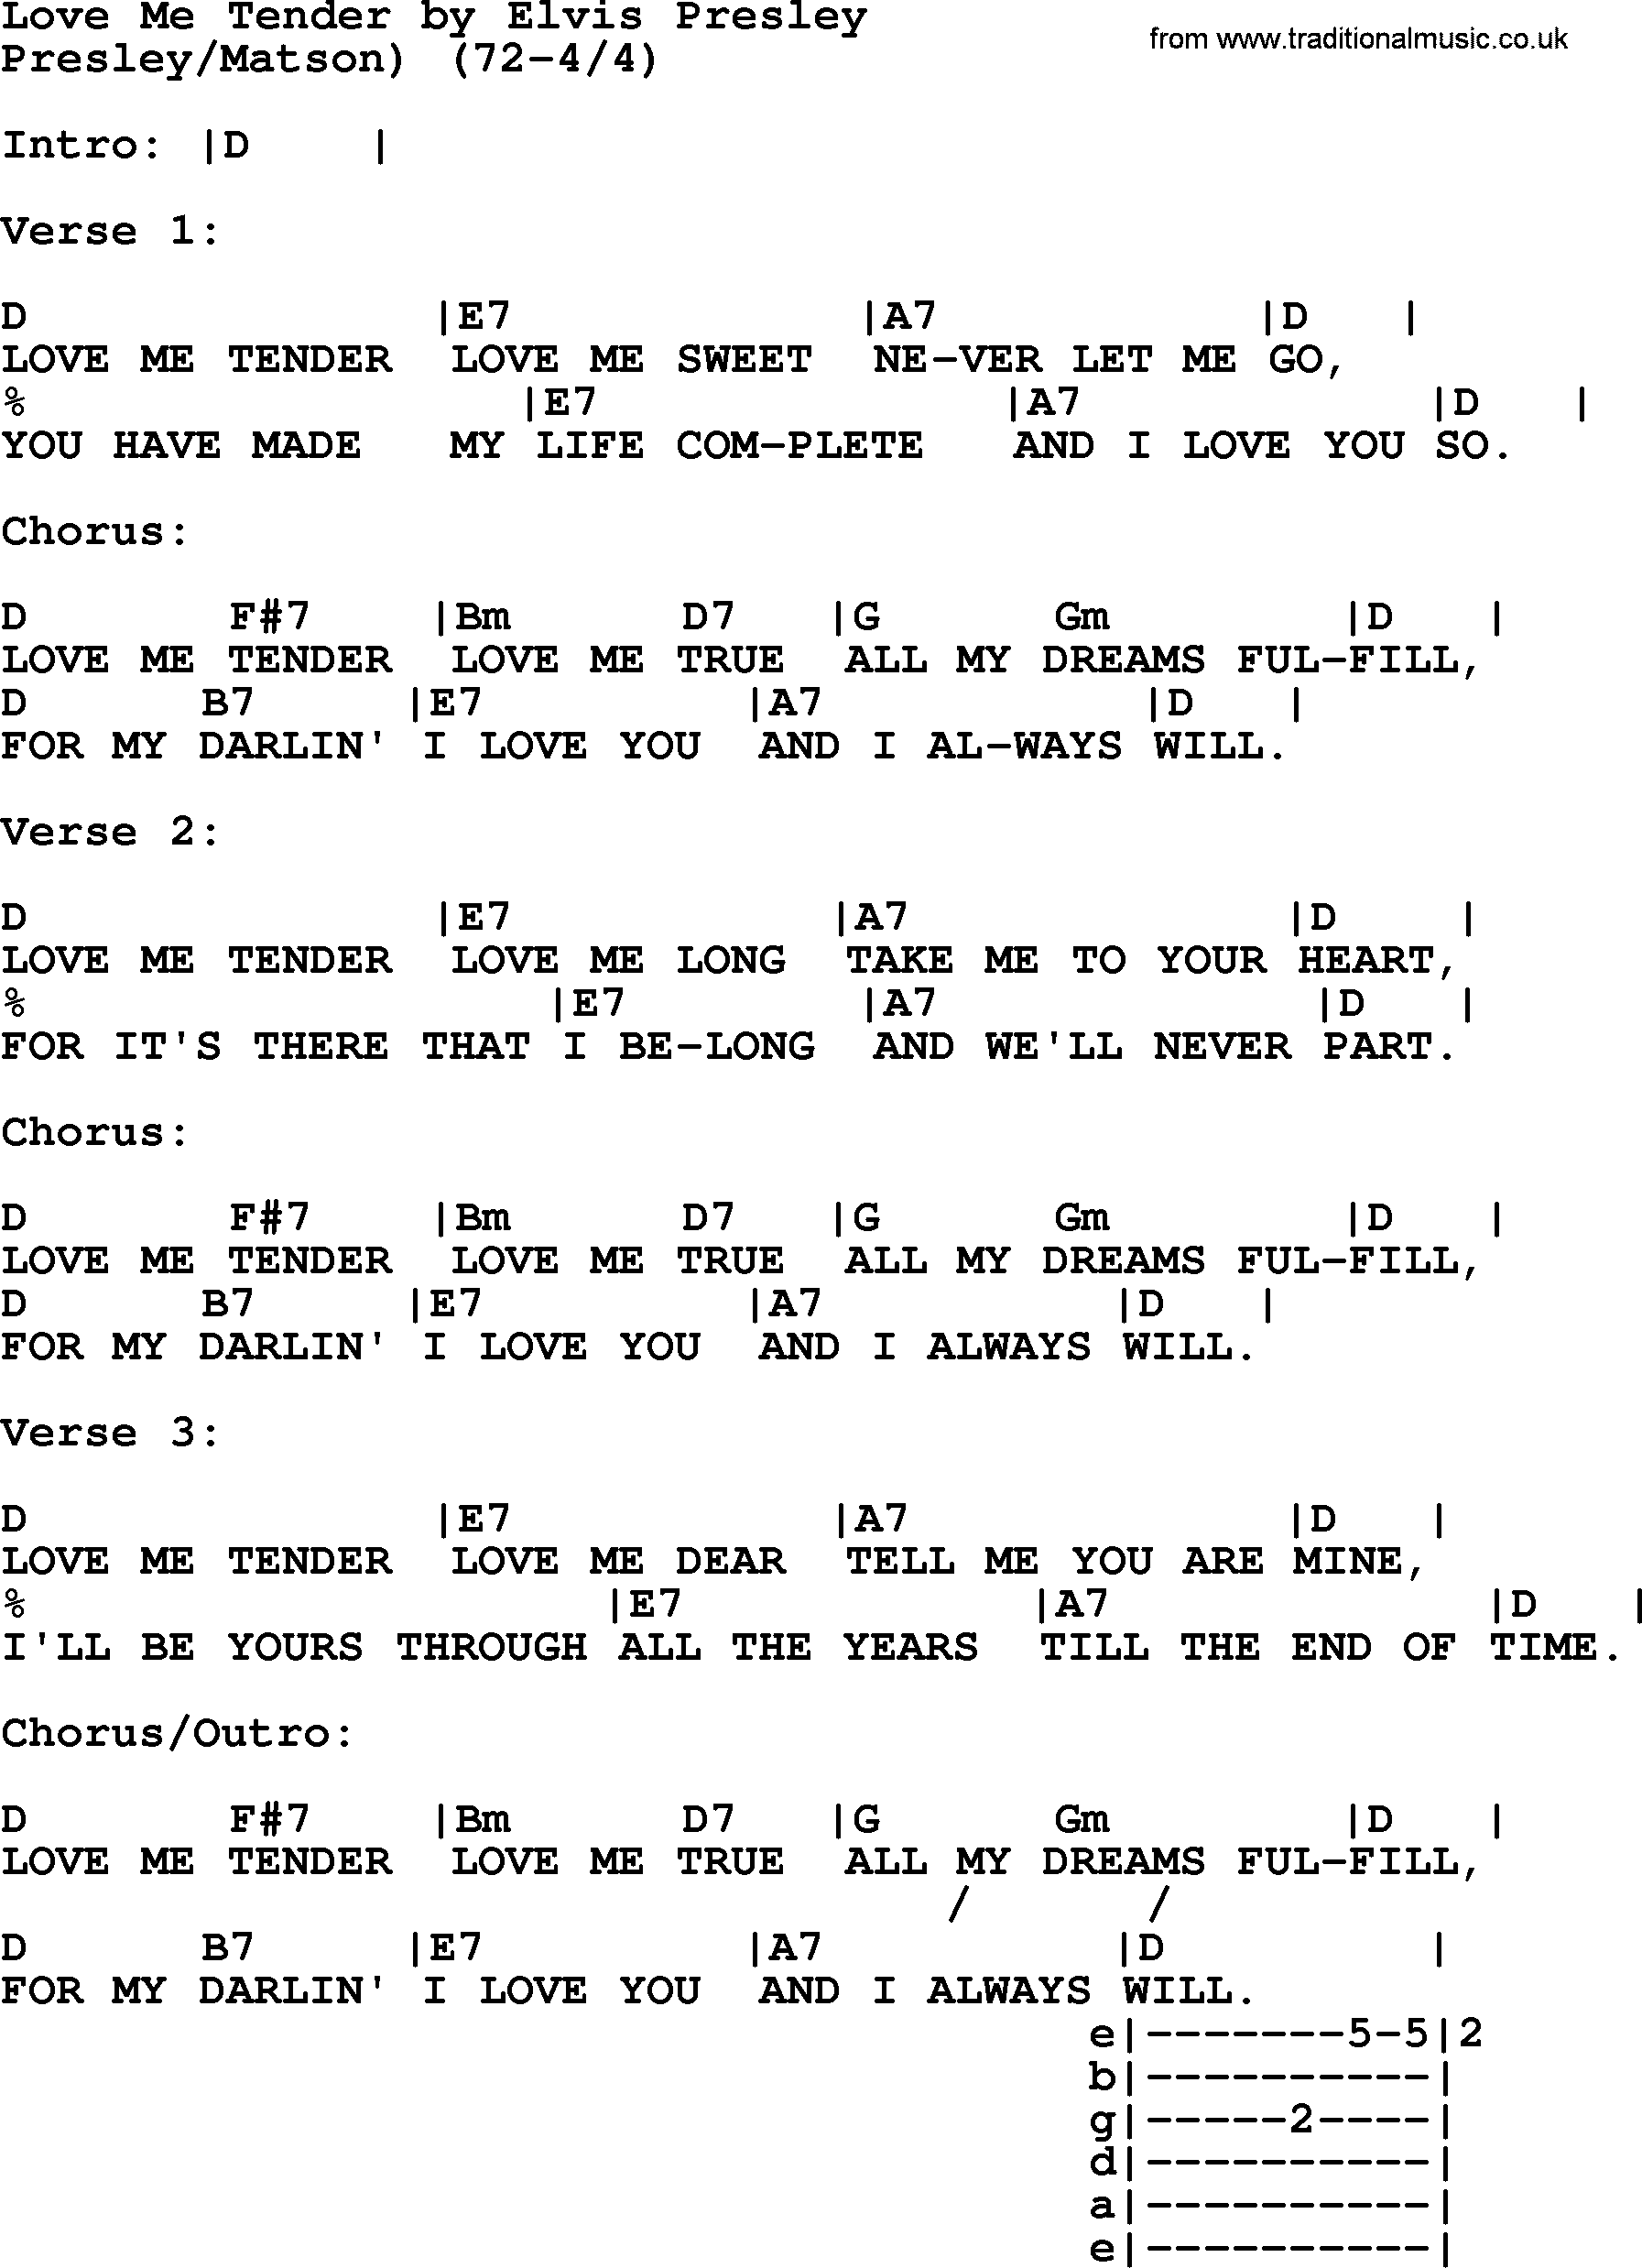 Love Me Tender sheet music for voice solo (PDF)